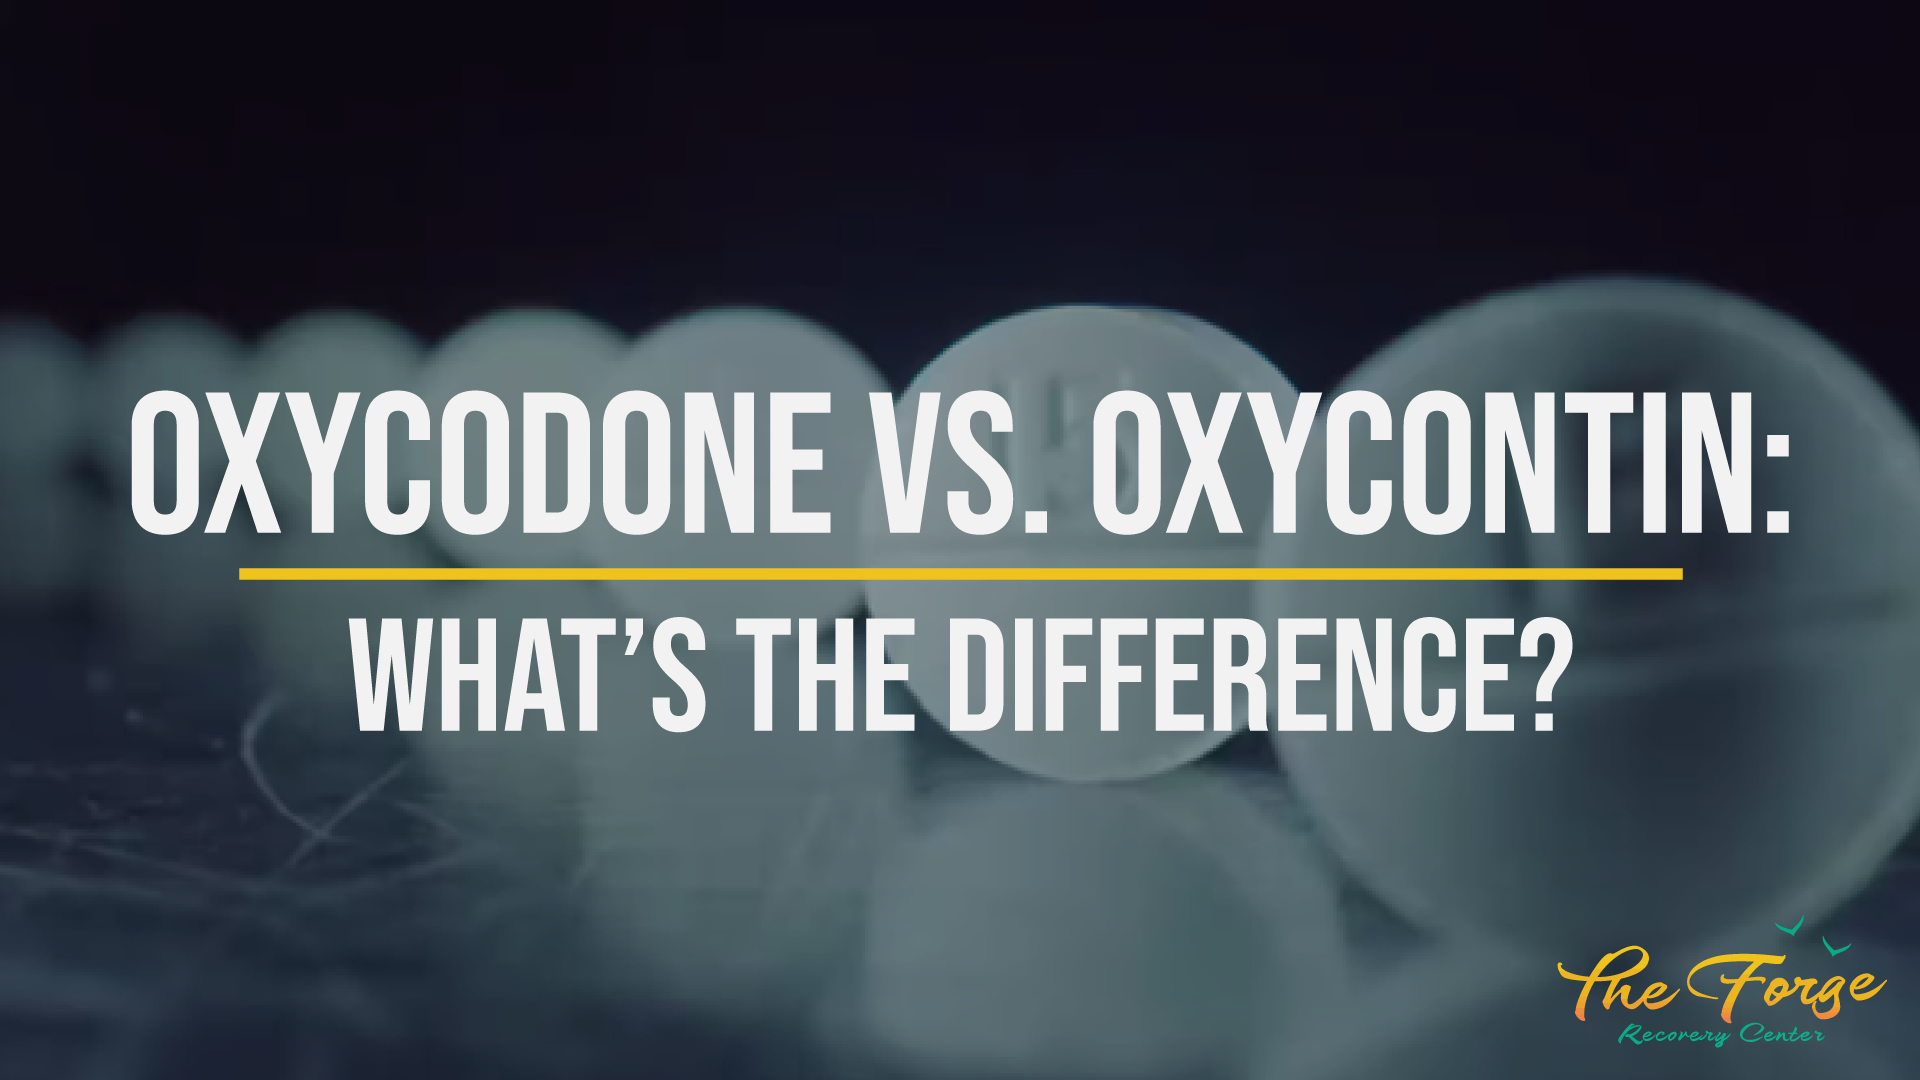 Oxycodone vs. Oxycontin: What's the Difference? Here's Our Guide to These Prescription Opioids